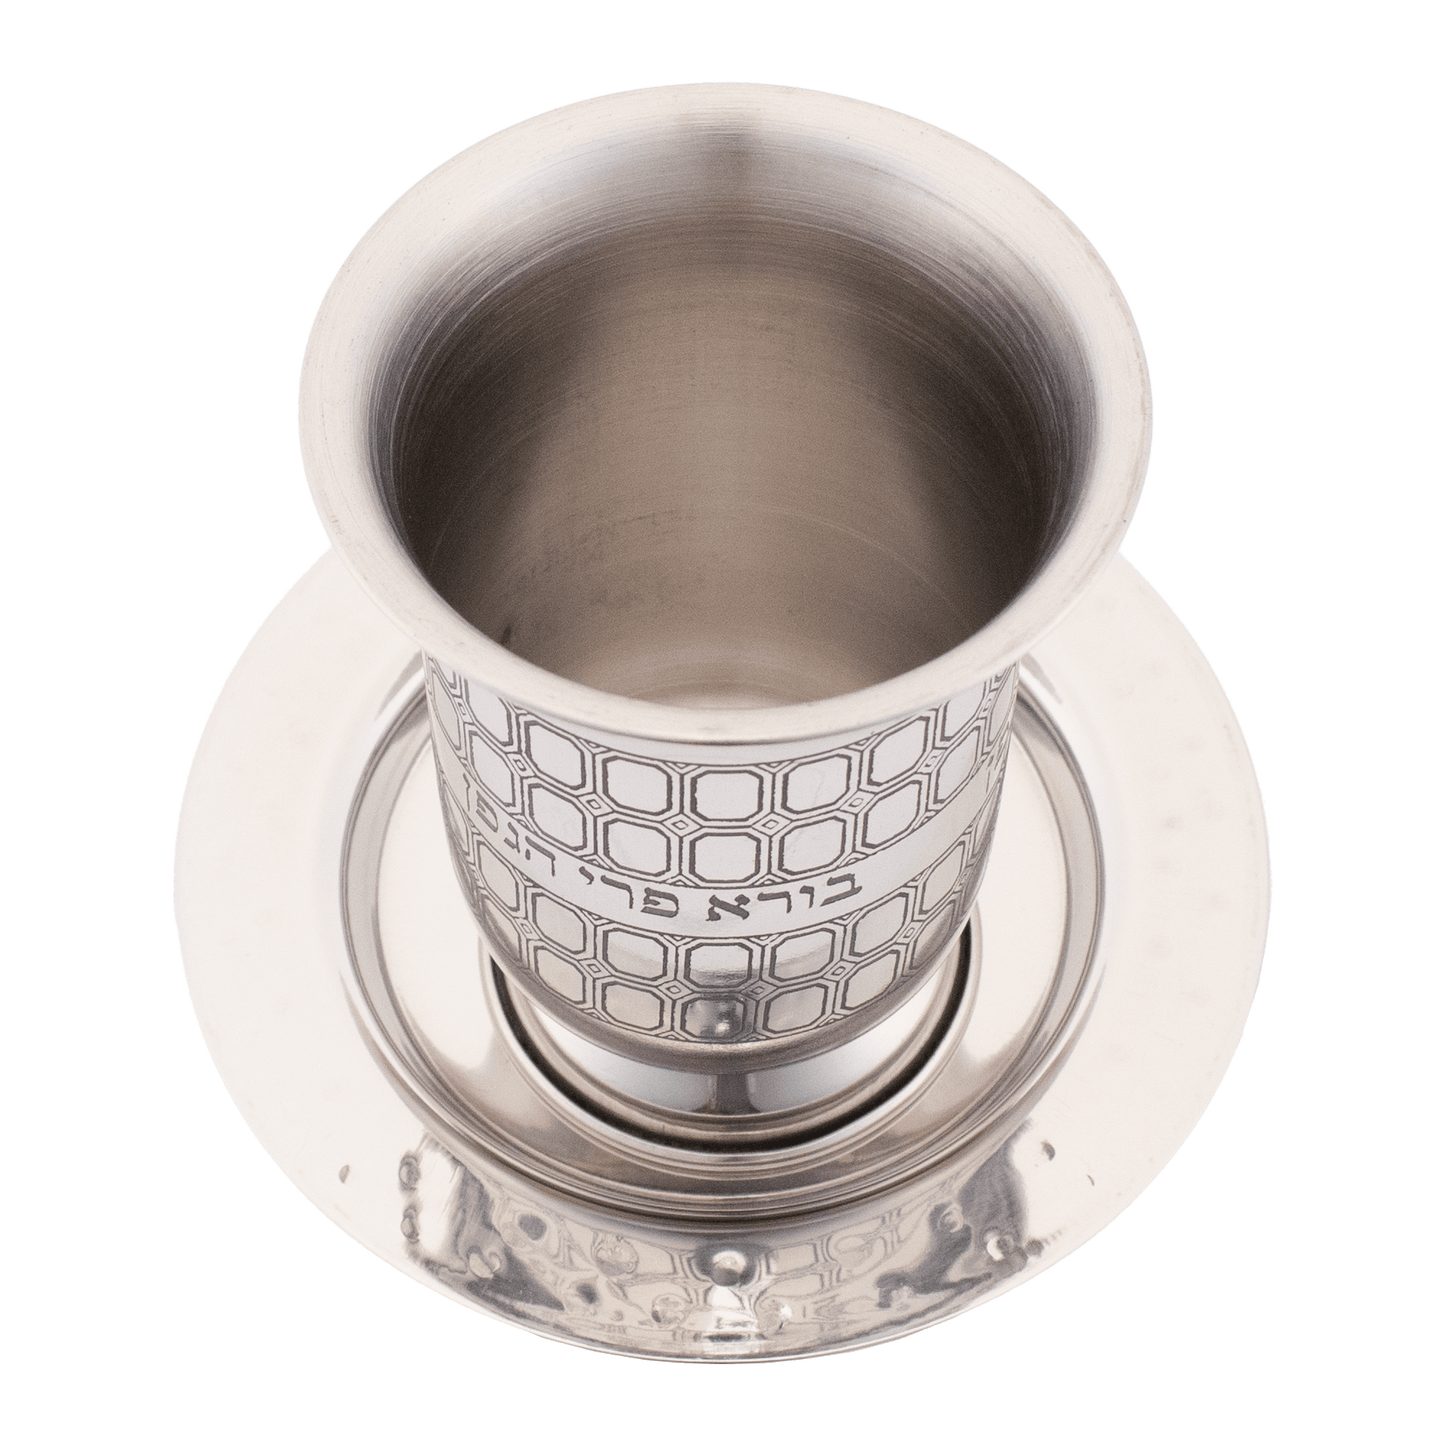 Stainless Steel Engraved Kiddush Cup with Rounded Saucer